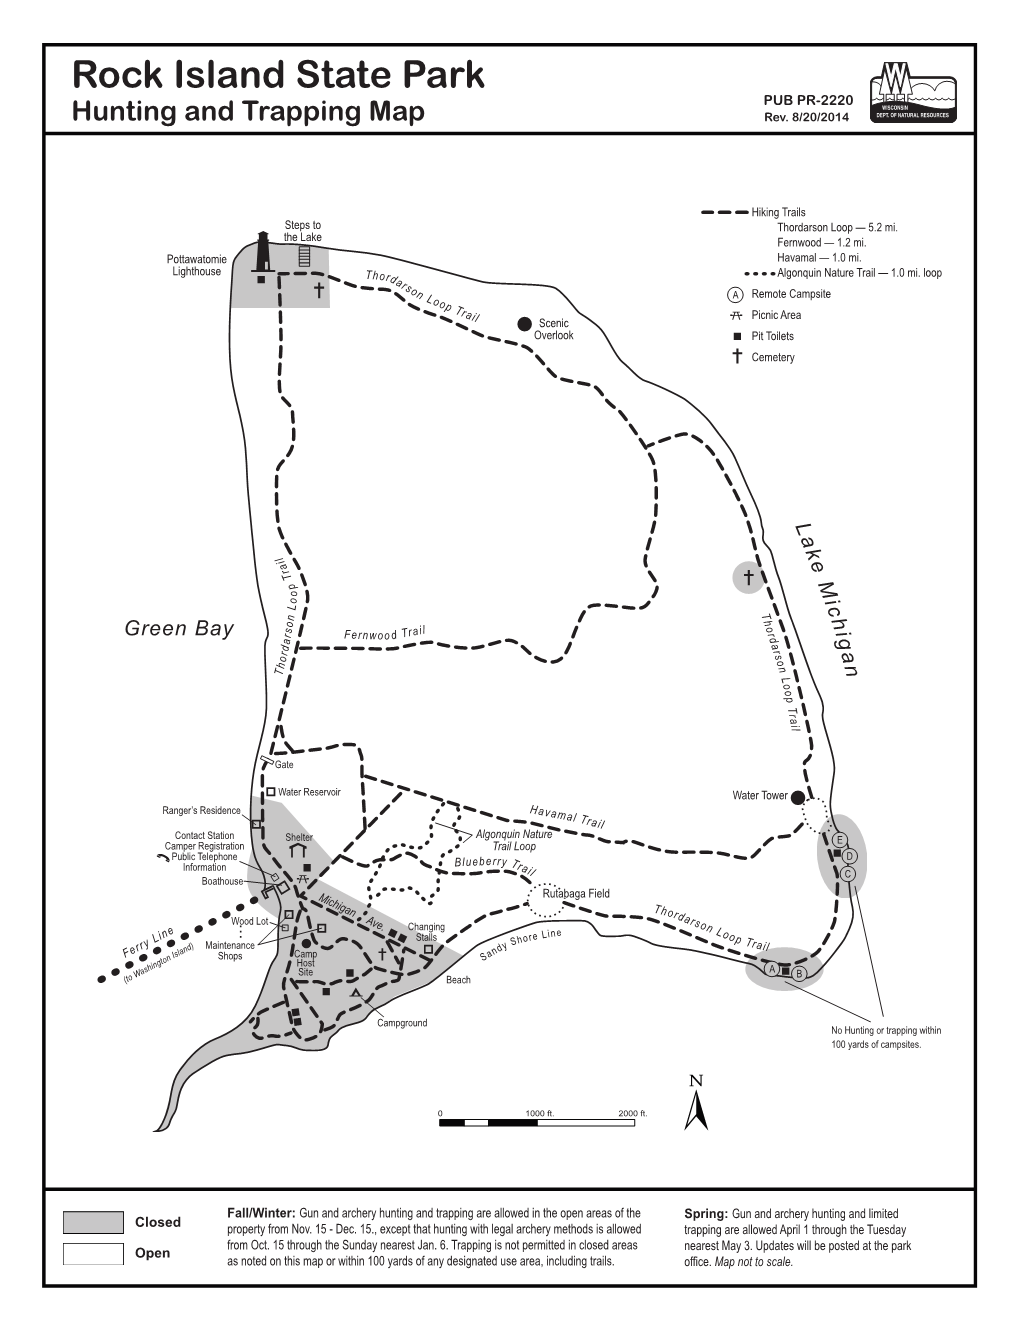 Rock Island State Park PUB PR-2220 Hunting and Trapping Map Rev